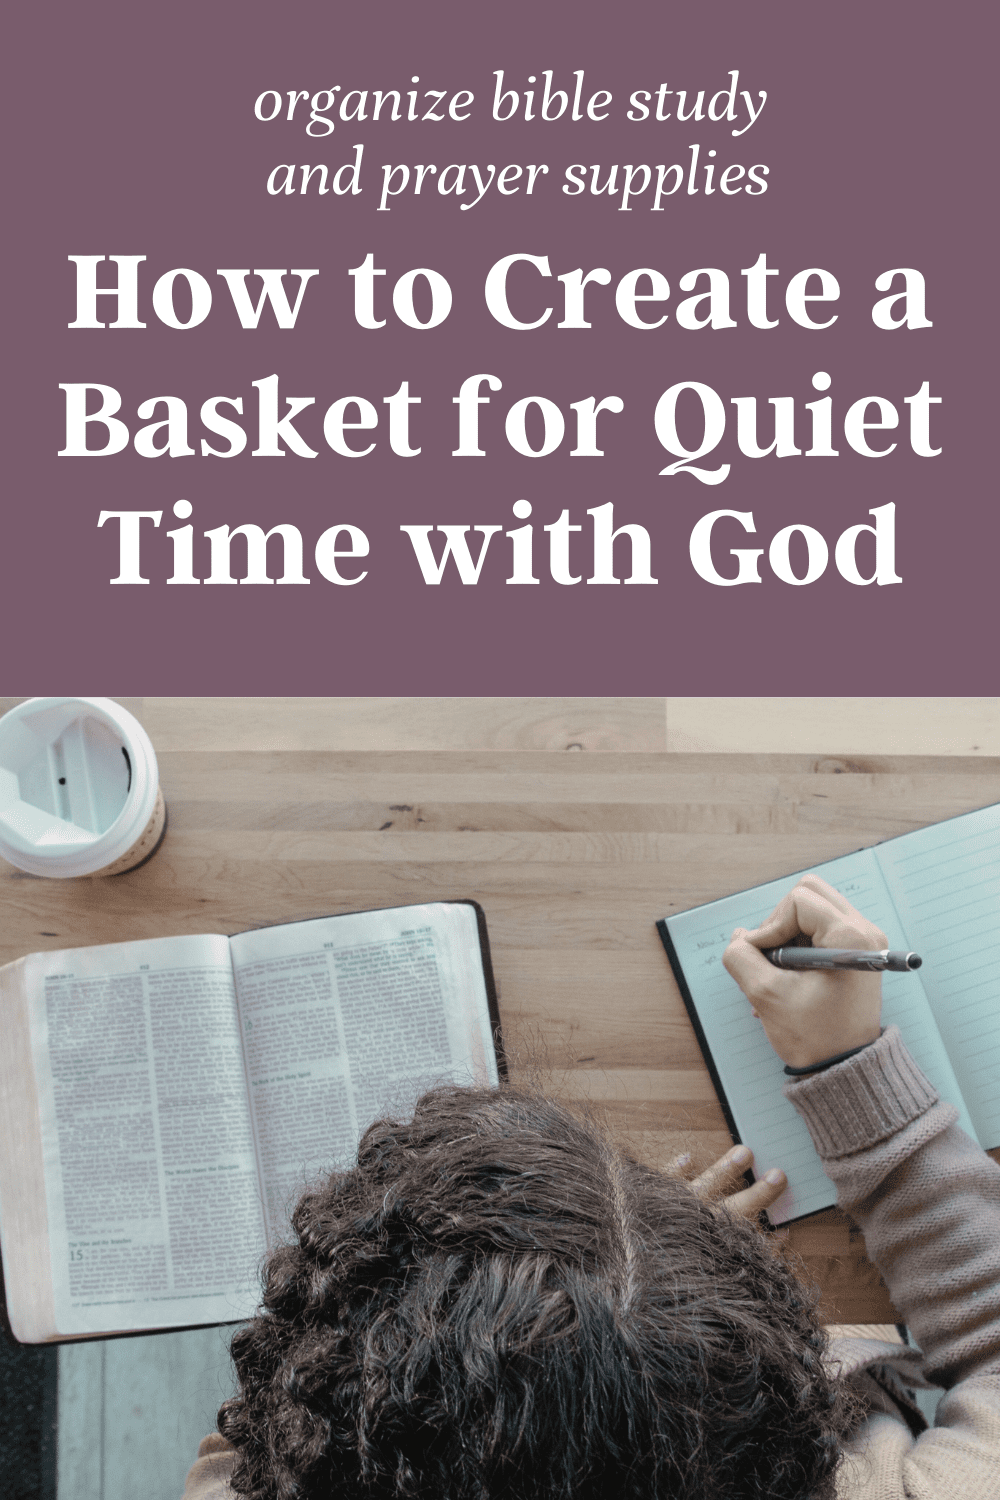 Need help organizing bible study supplies? Learn how creating a basket specifically for your quiet time with God can help you stop wasting time looking for stuff so you can spend more time in bible study and prayer.